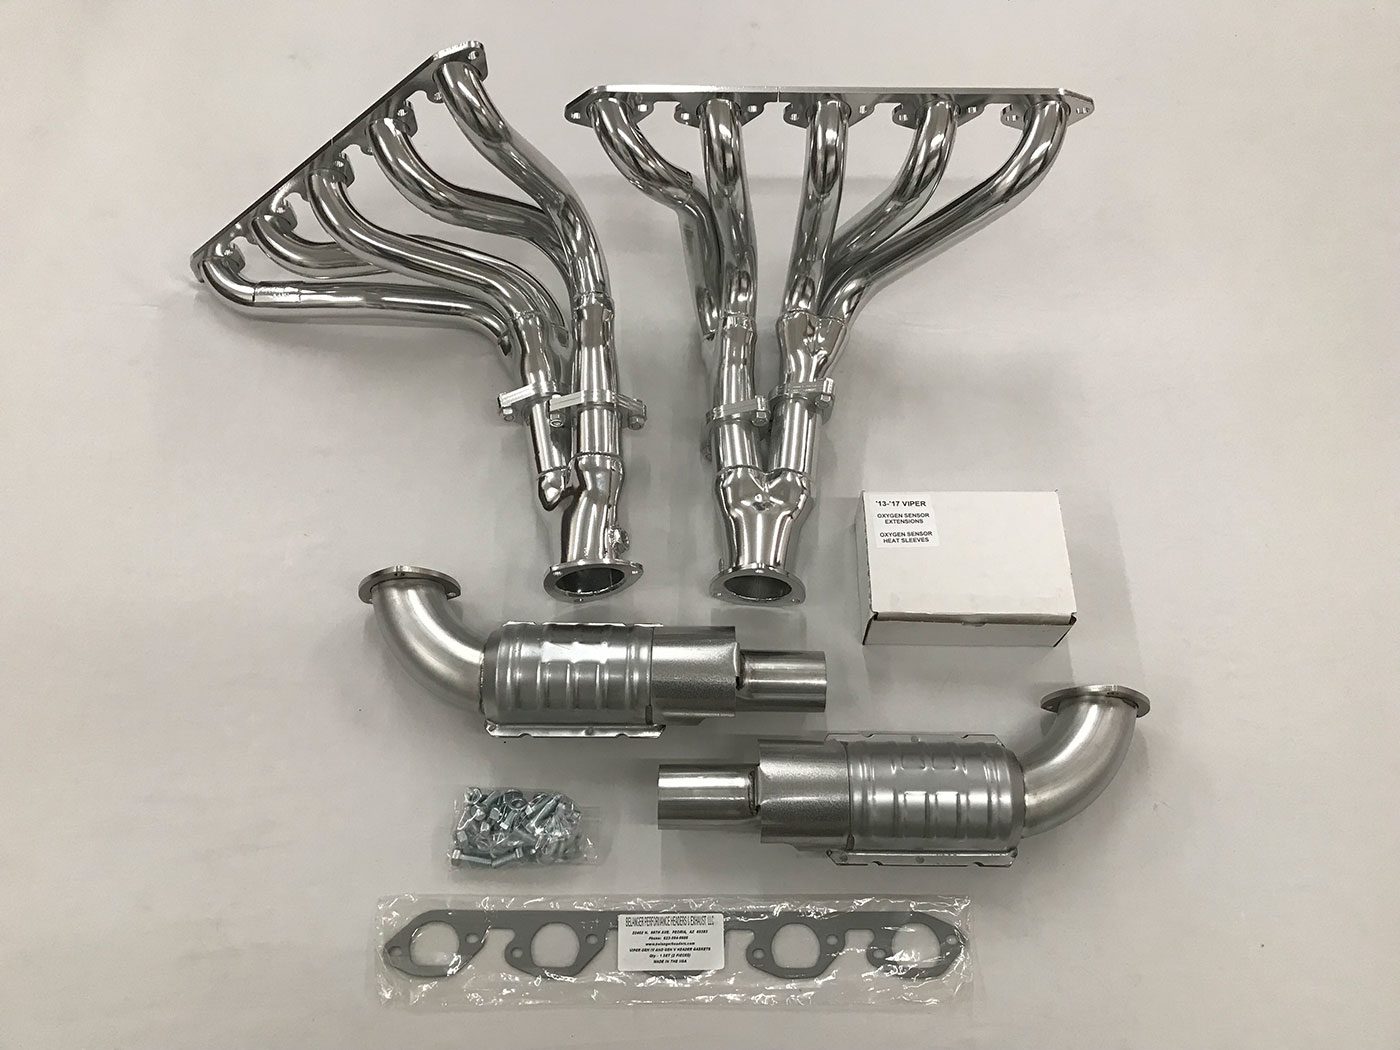 A set of exhaust pipes and manifolds for the car.